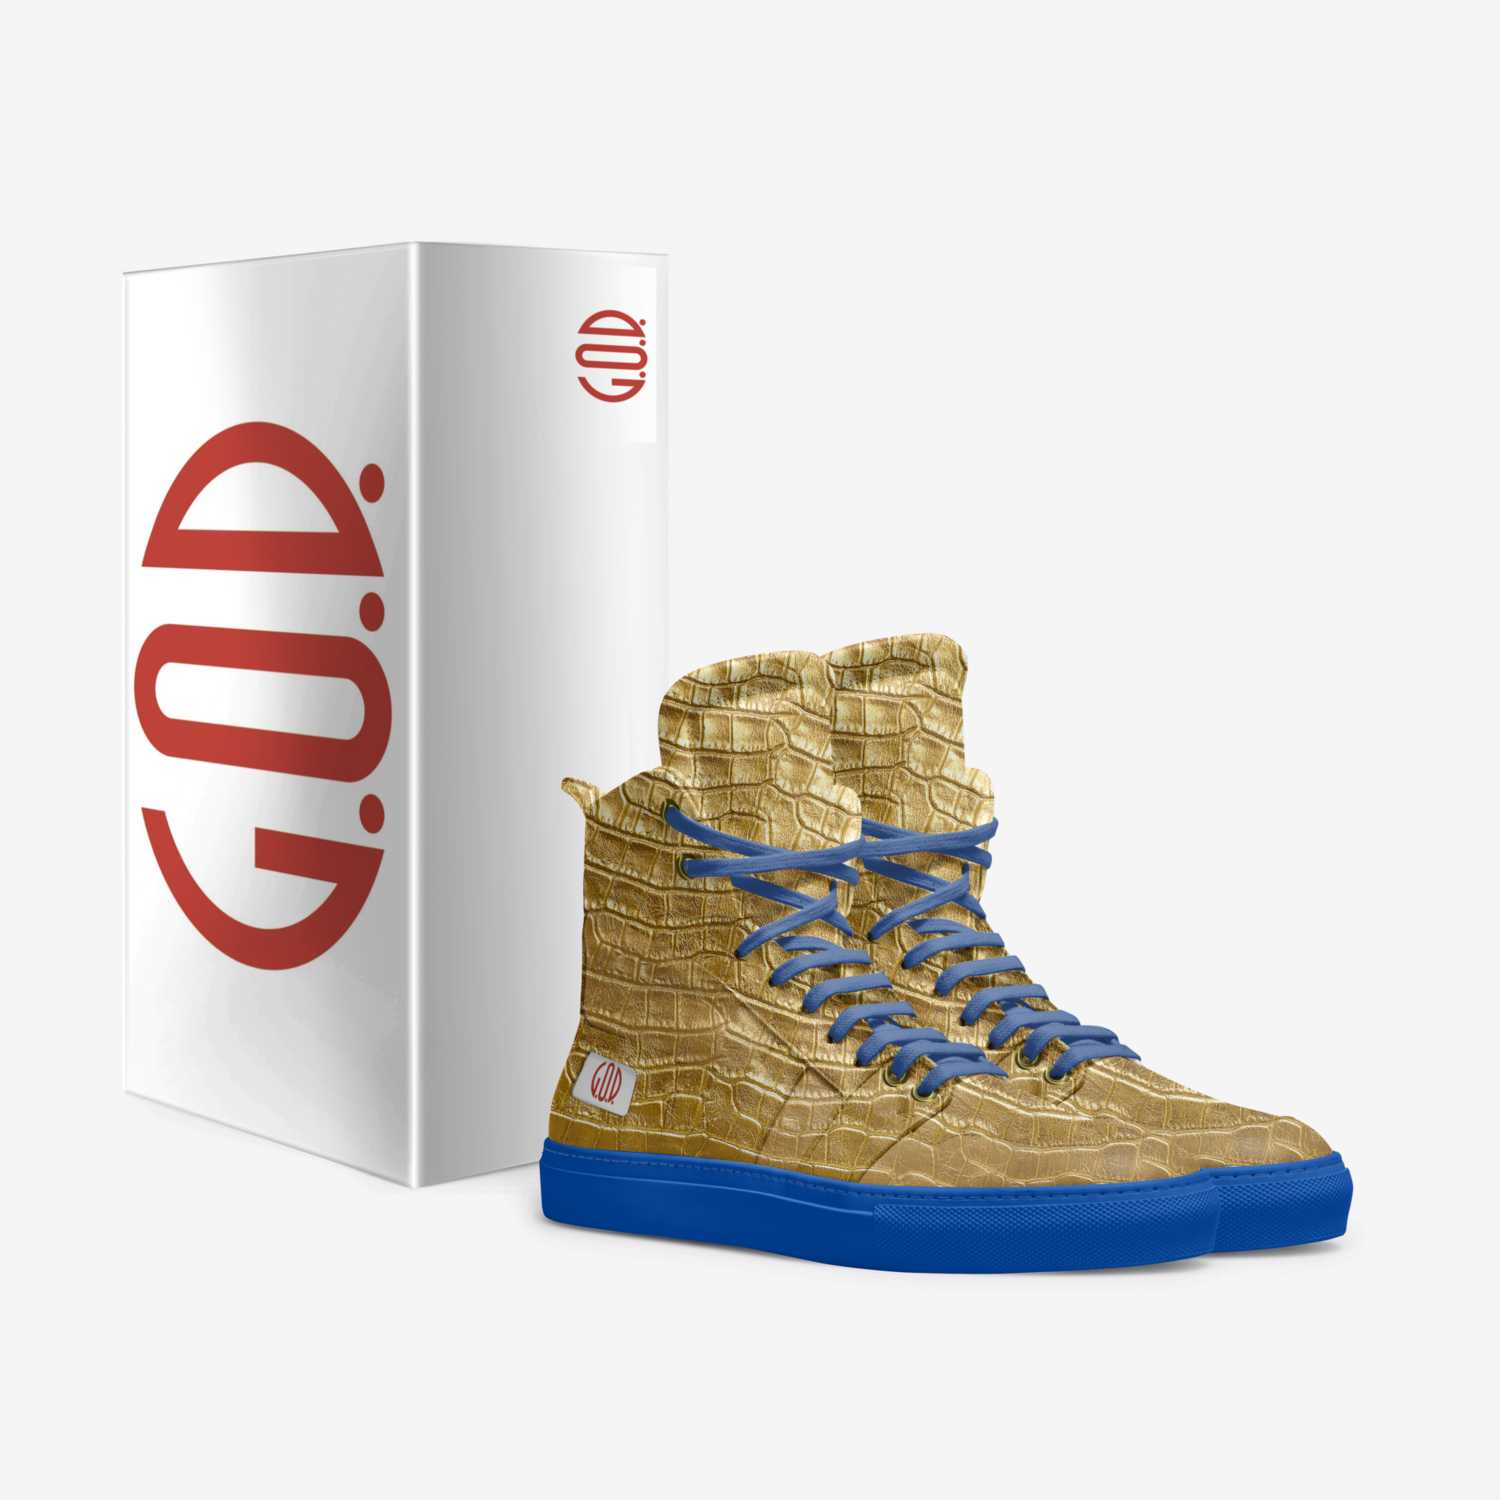 Aztec Gold custom made in Italy shoes by G.O.D. | Box view